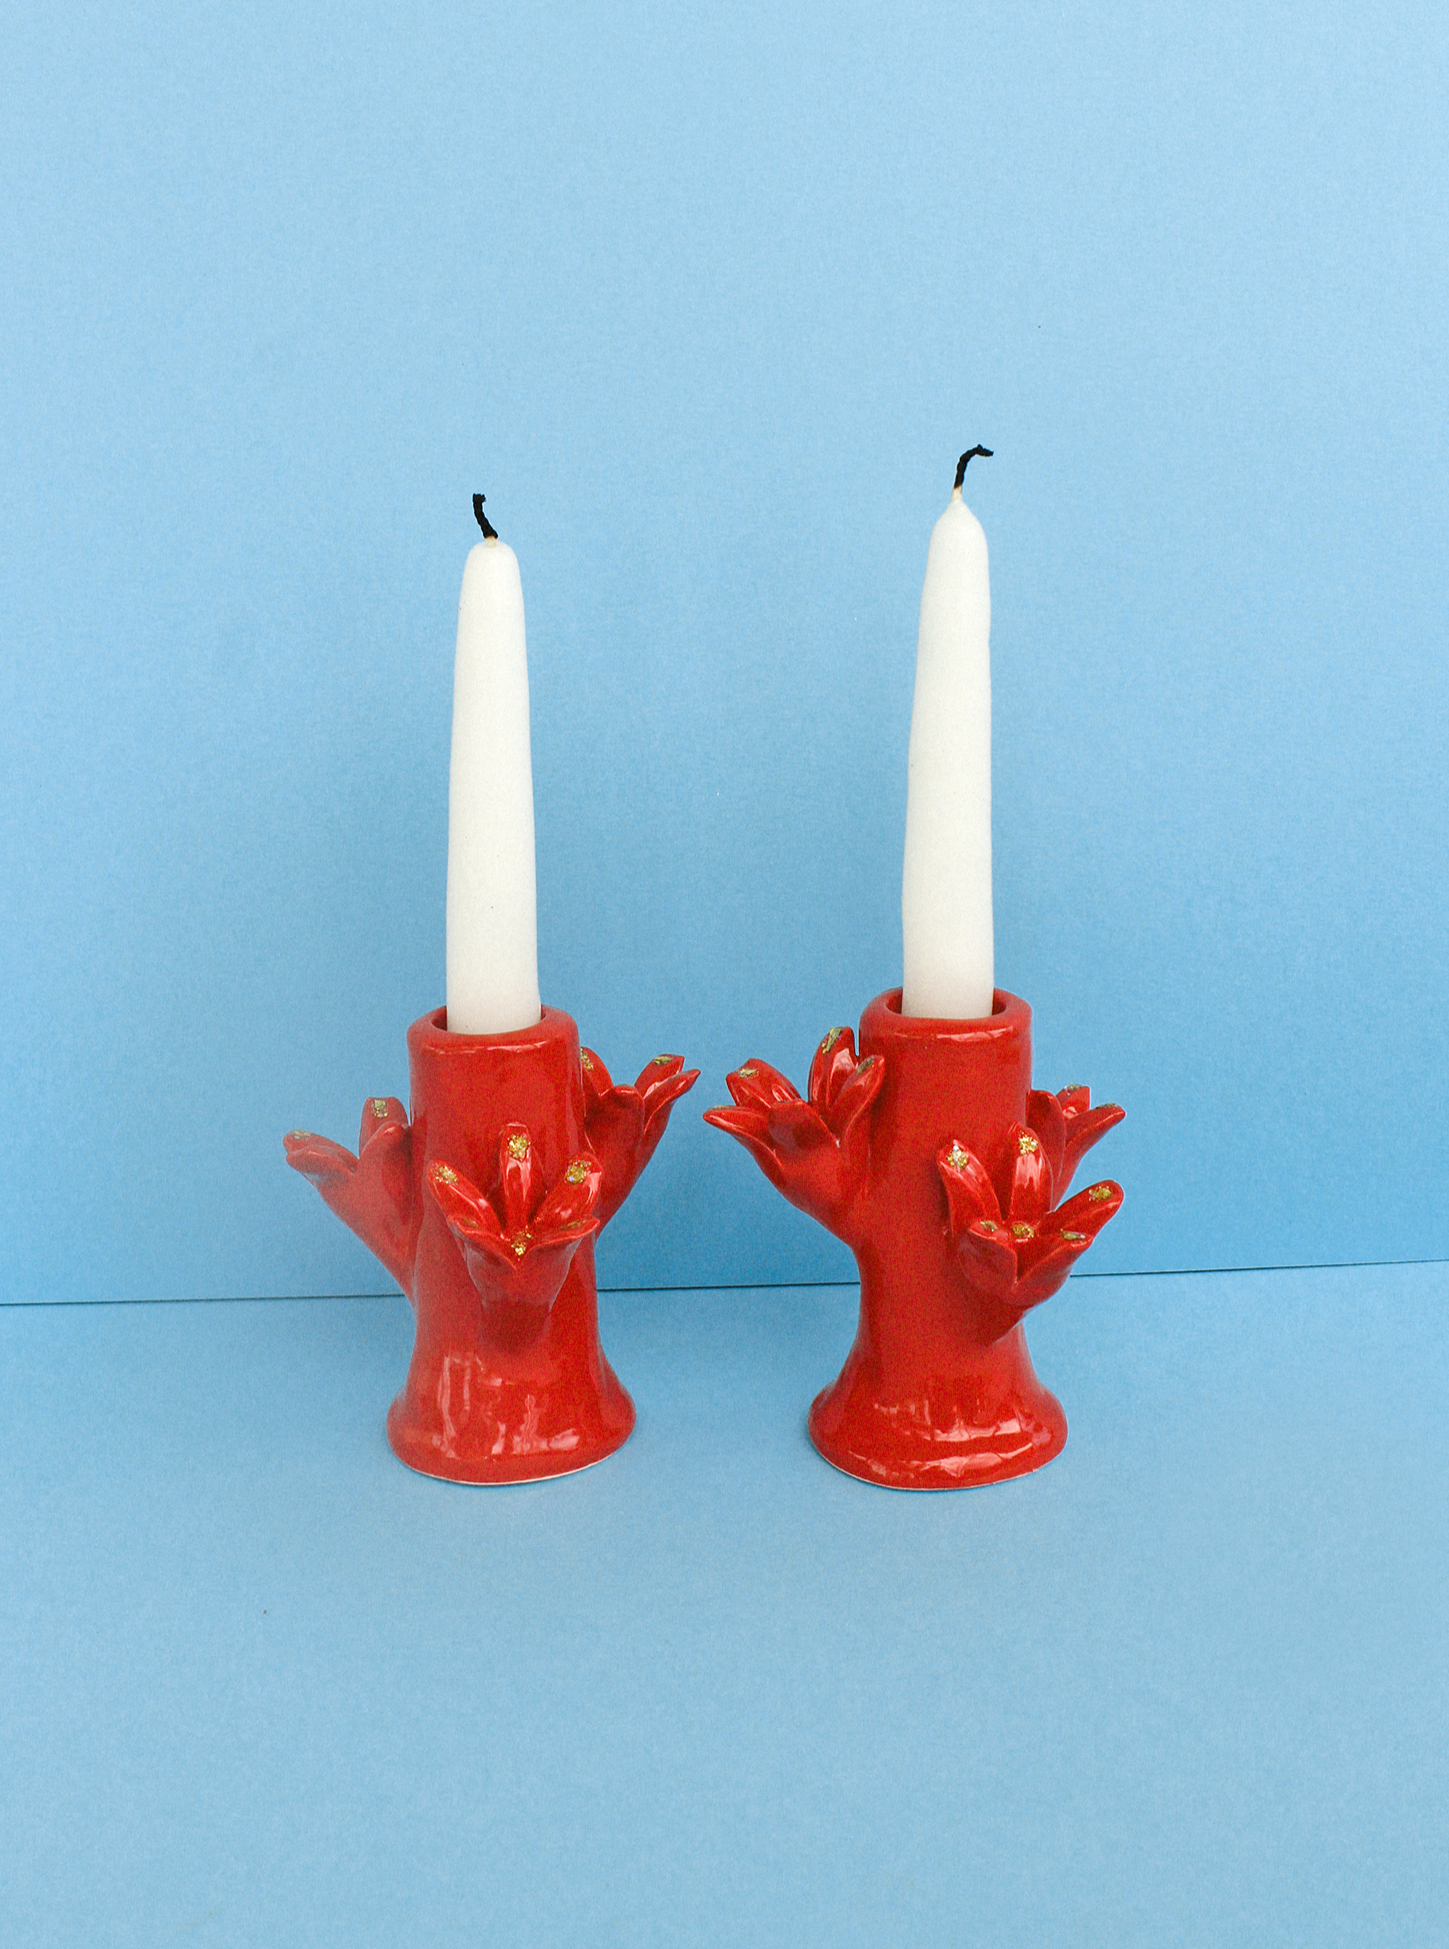 Sentence with replaced product and brand name: Two white candles, each standing in a Casa Veronica Flores Candleholder Set - Rojo shaped like a bird with outstretched wings, against a plain blue background.